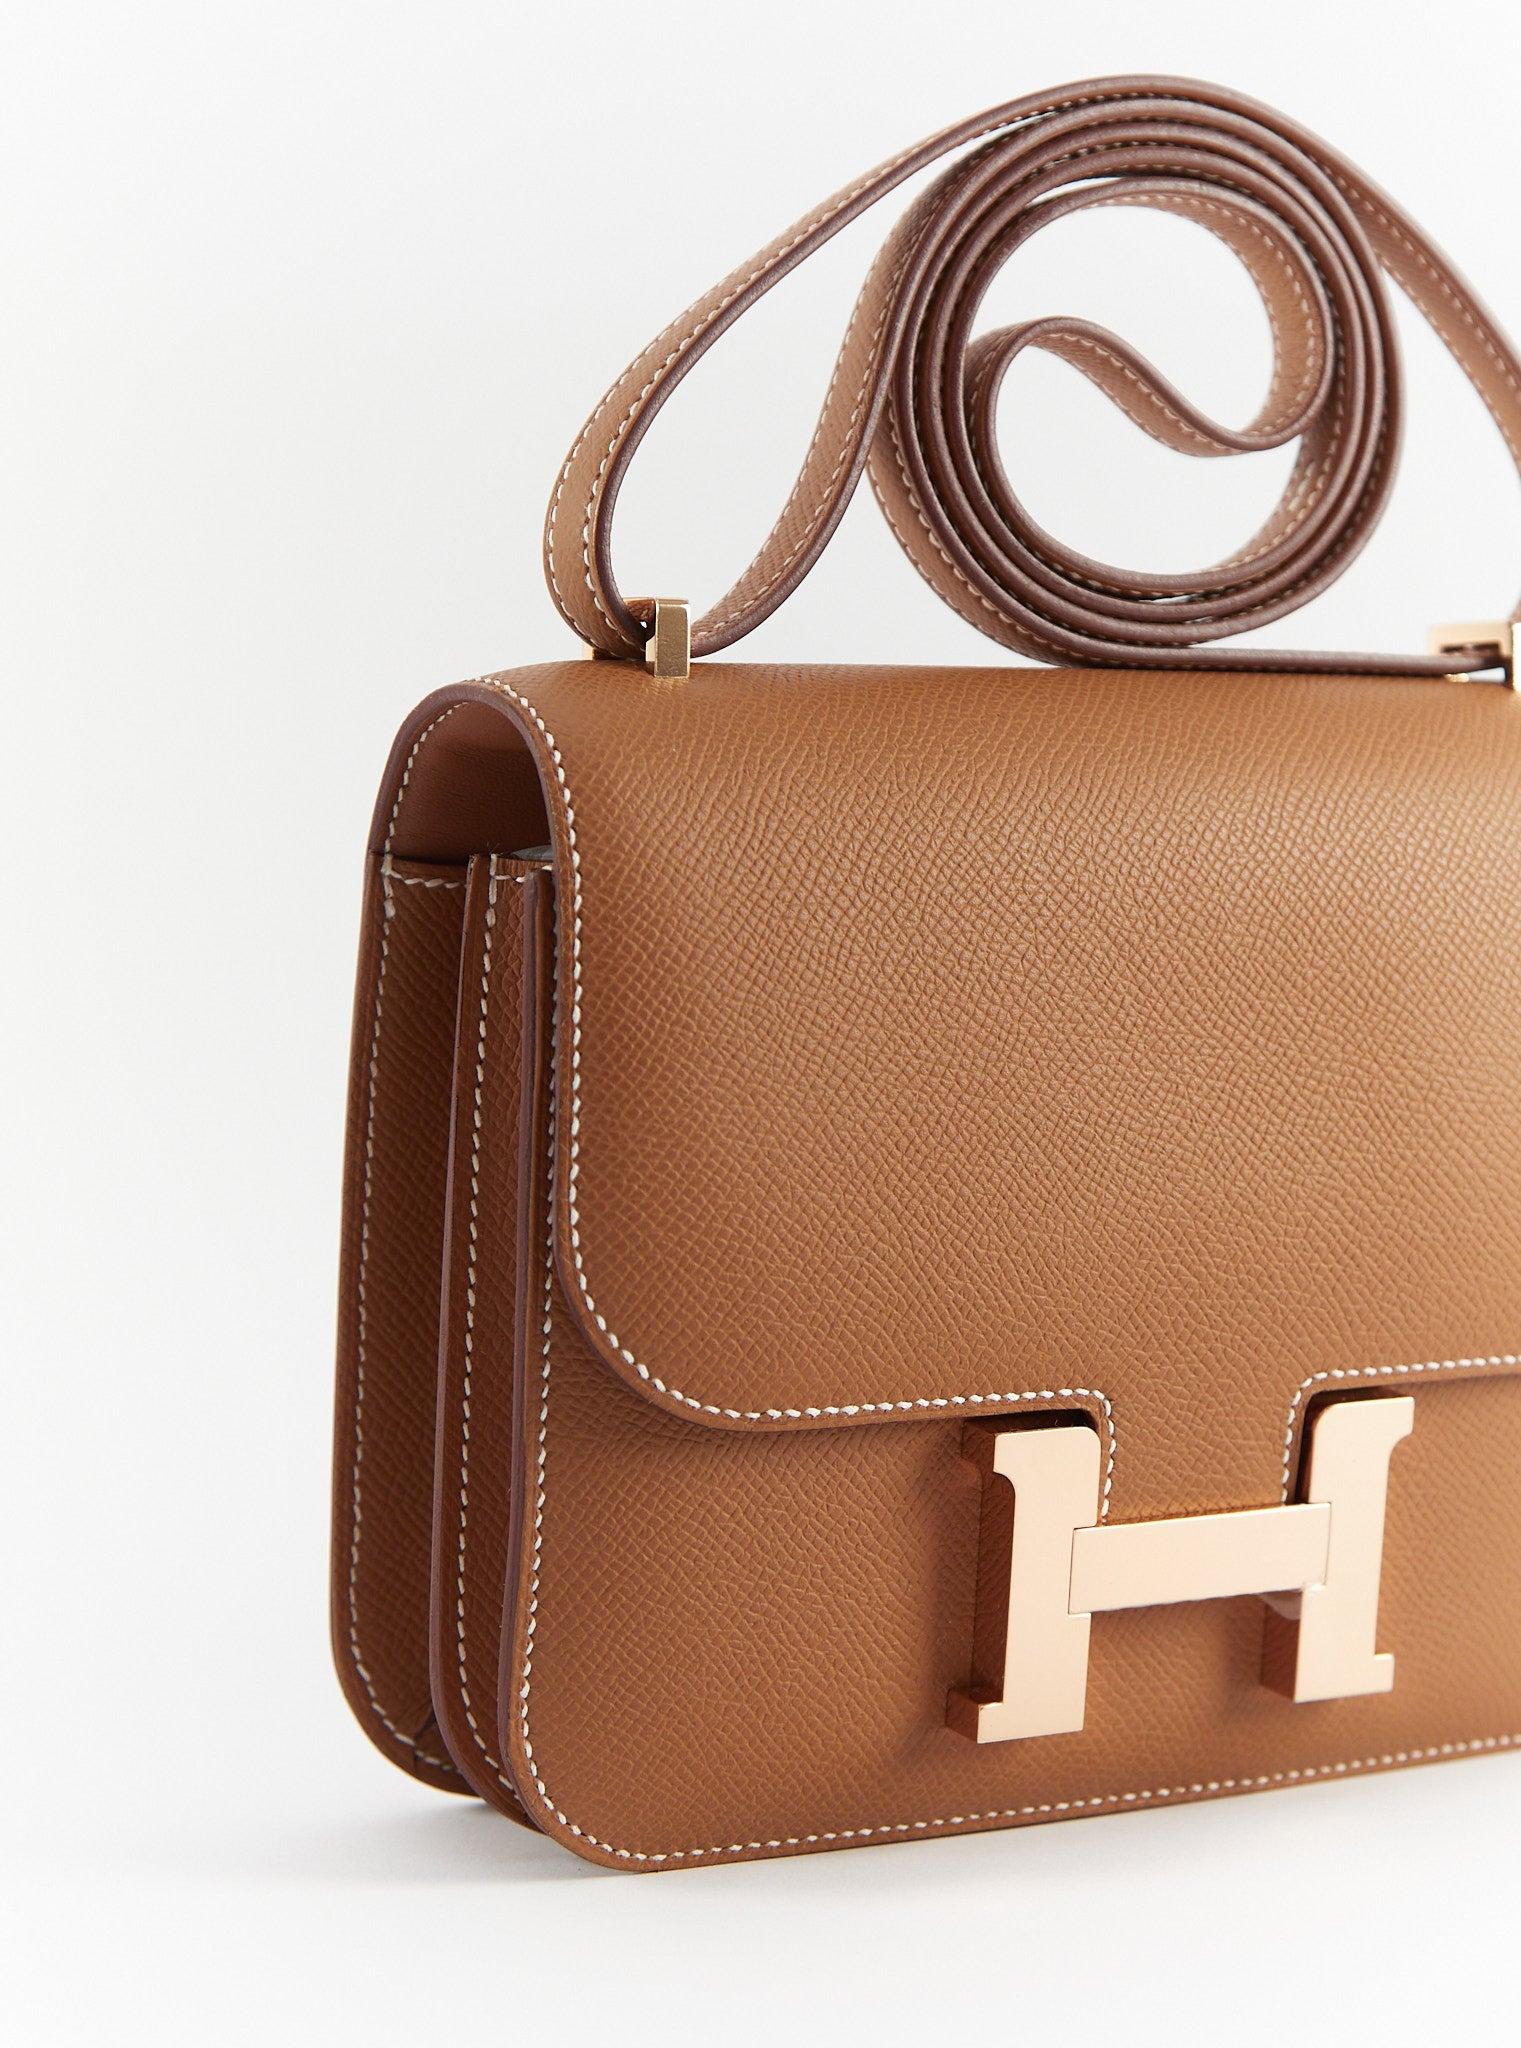 HERMÈS CONSTANCE 18CM GOLD Epsom Leather with Rose Gold Hardware In Excellent Condition For Sale In London, GB